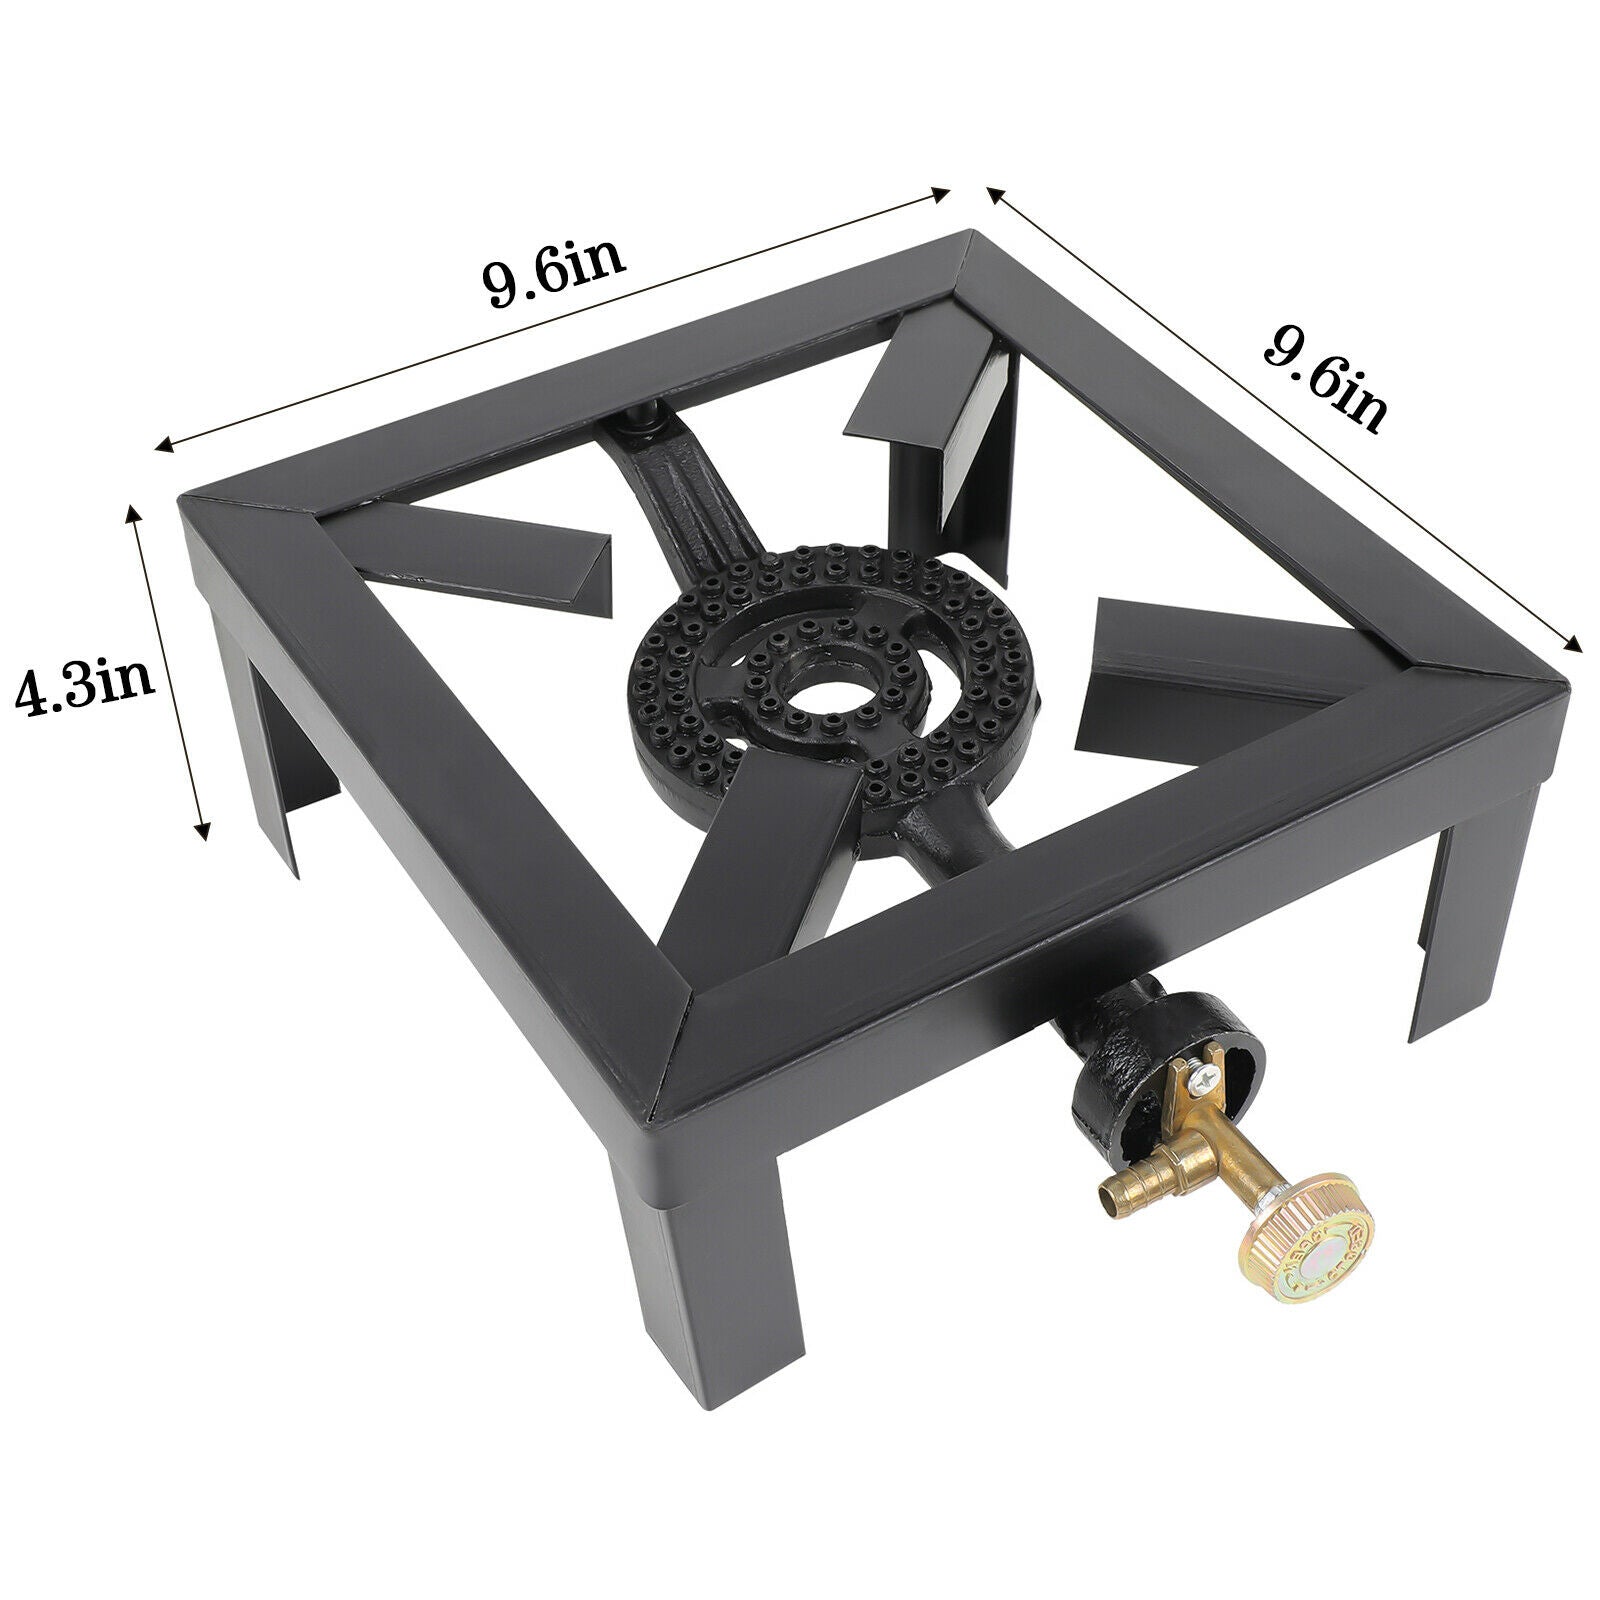 Portable Camping Stove size